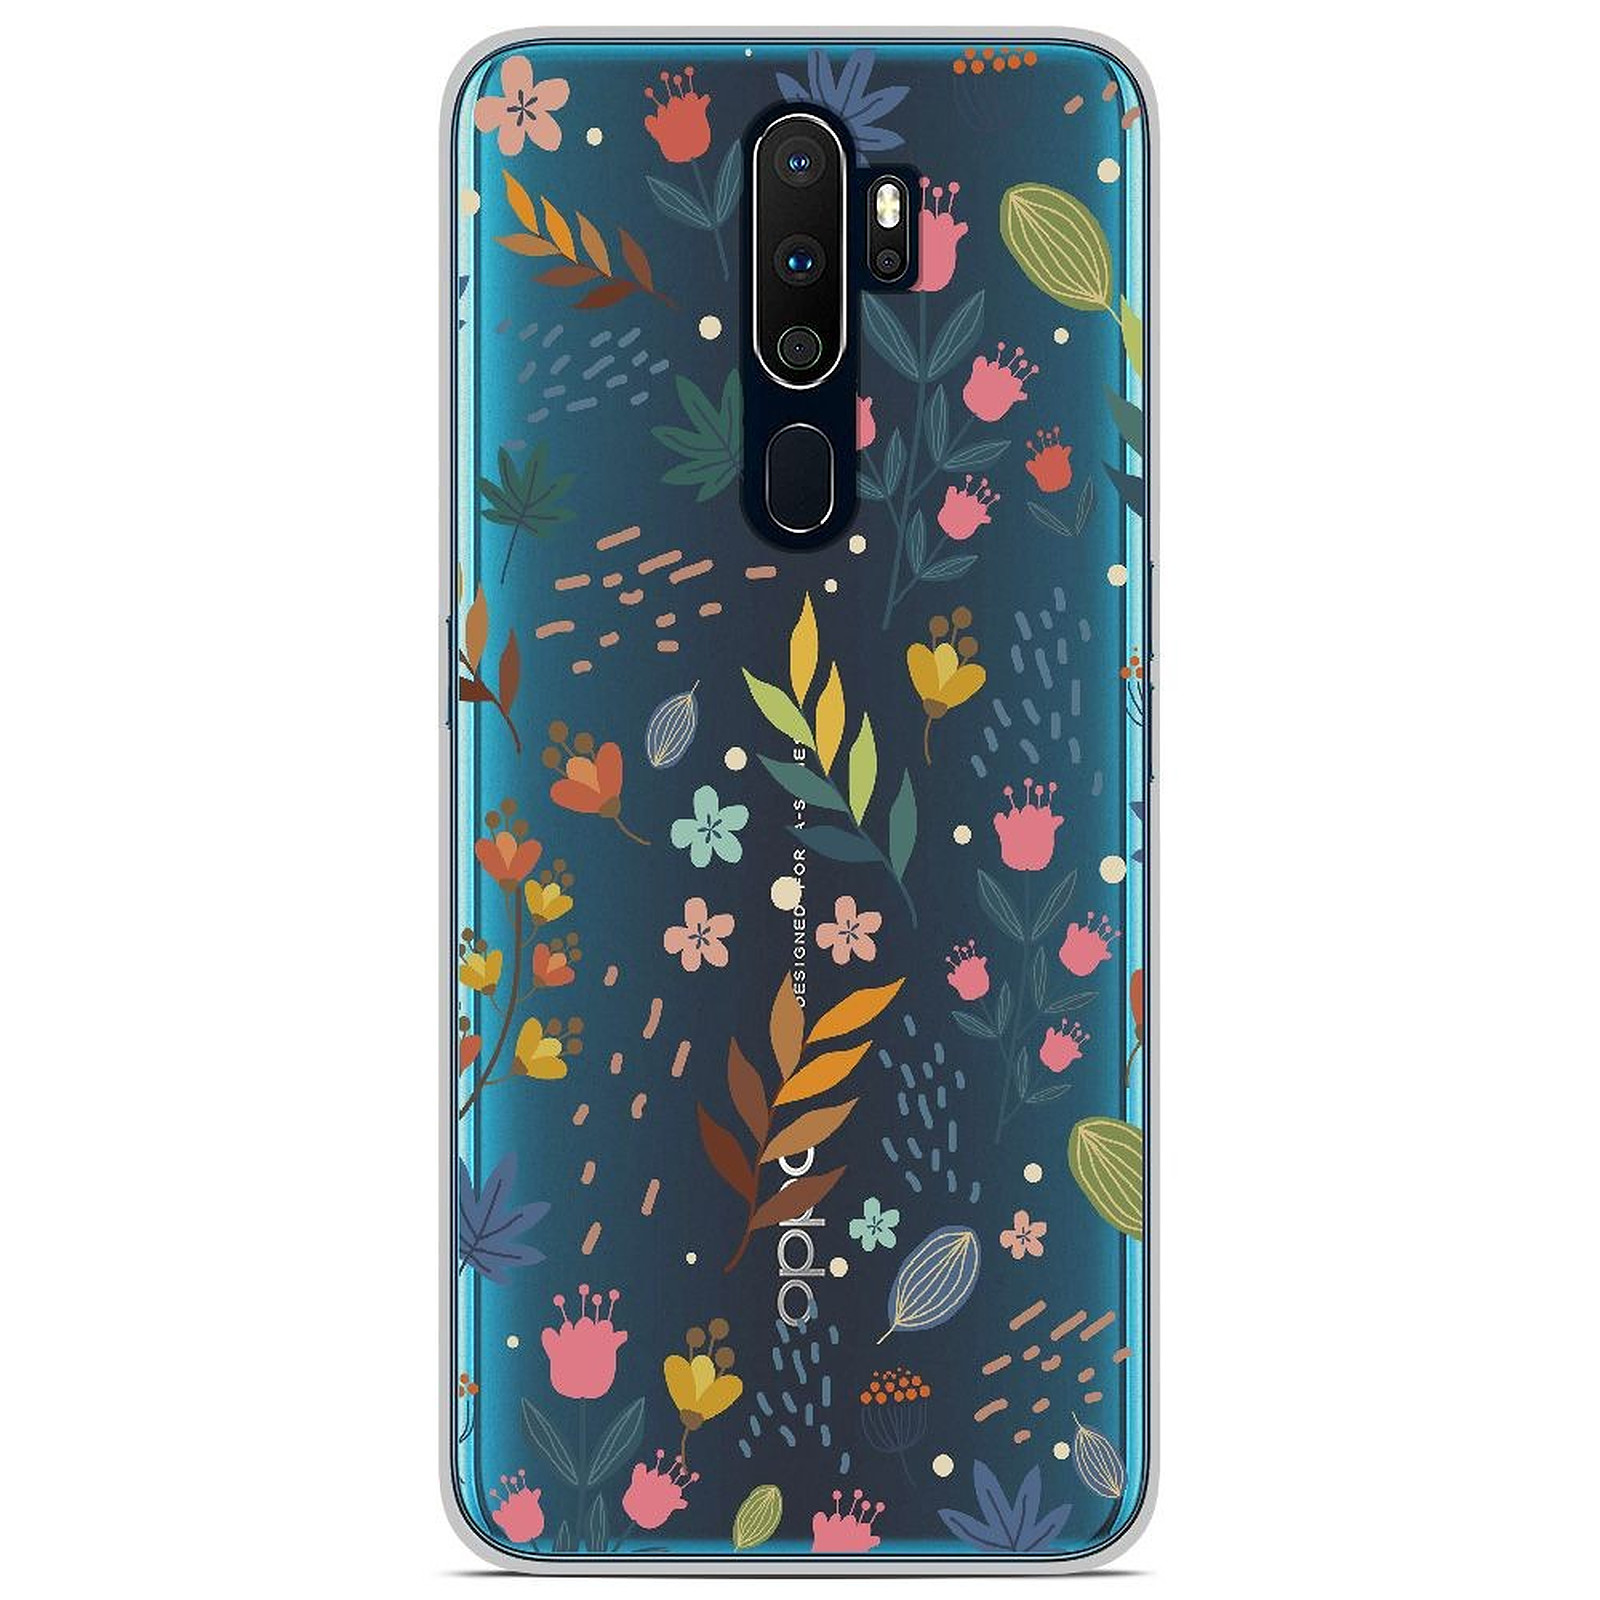 1001 Coques Coque silicone gel Oppo A9 2020 motif Fleurs colorees - Coque telephone 1001Coques